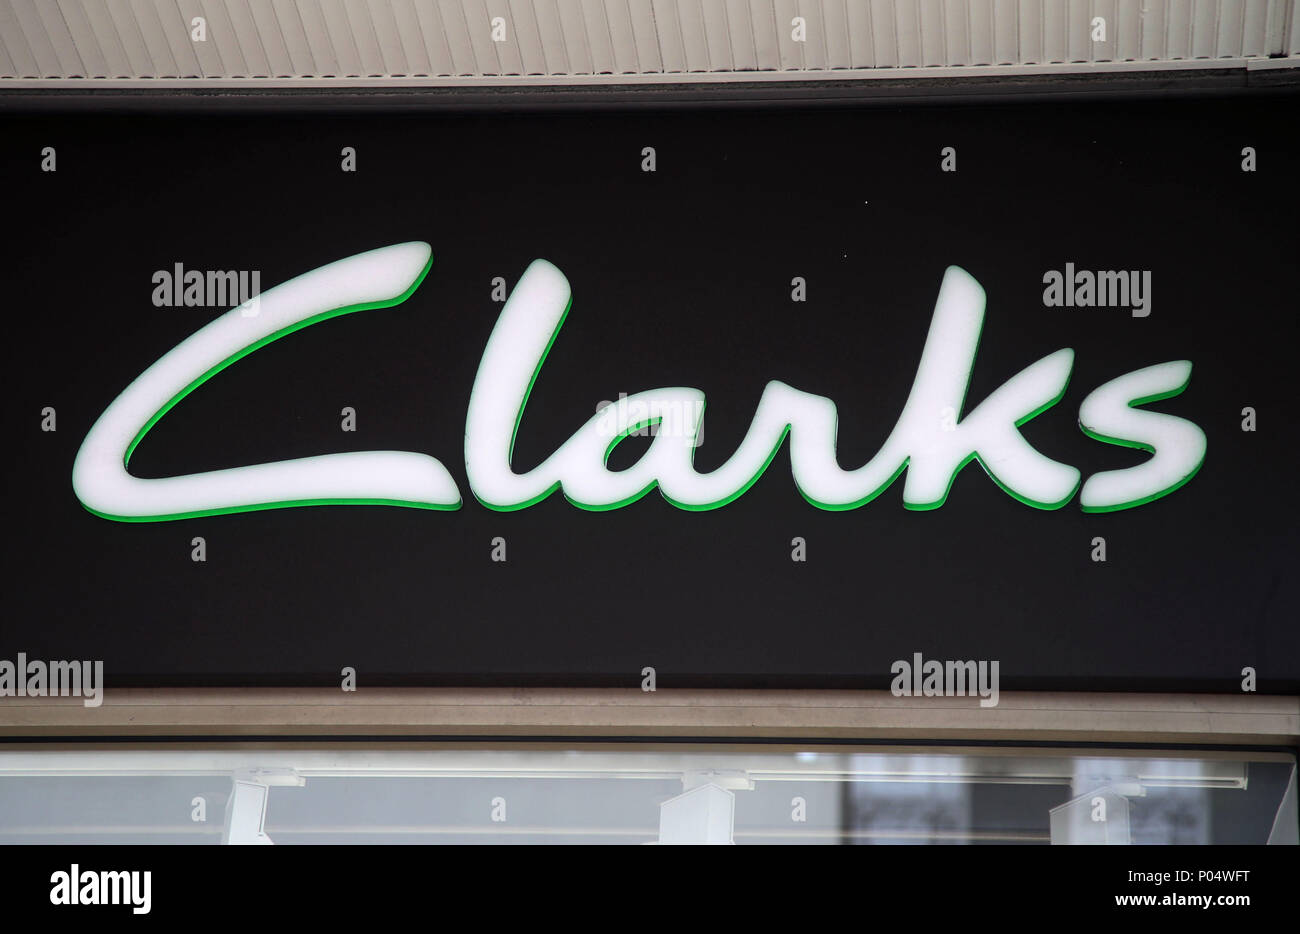 A Clarks shoe store on Oxford Street, central London Stock Photo - Alamy